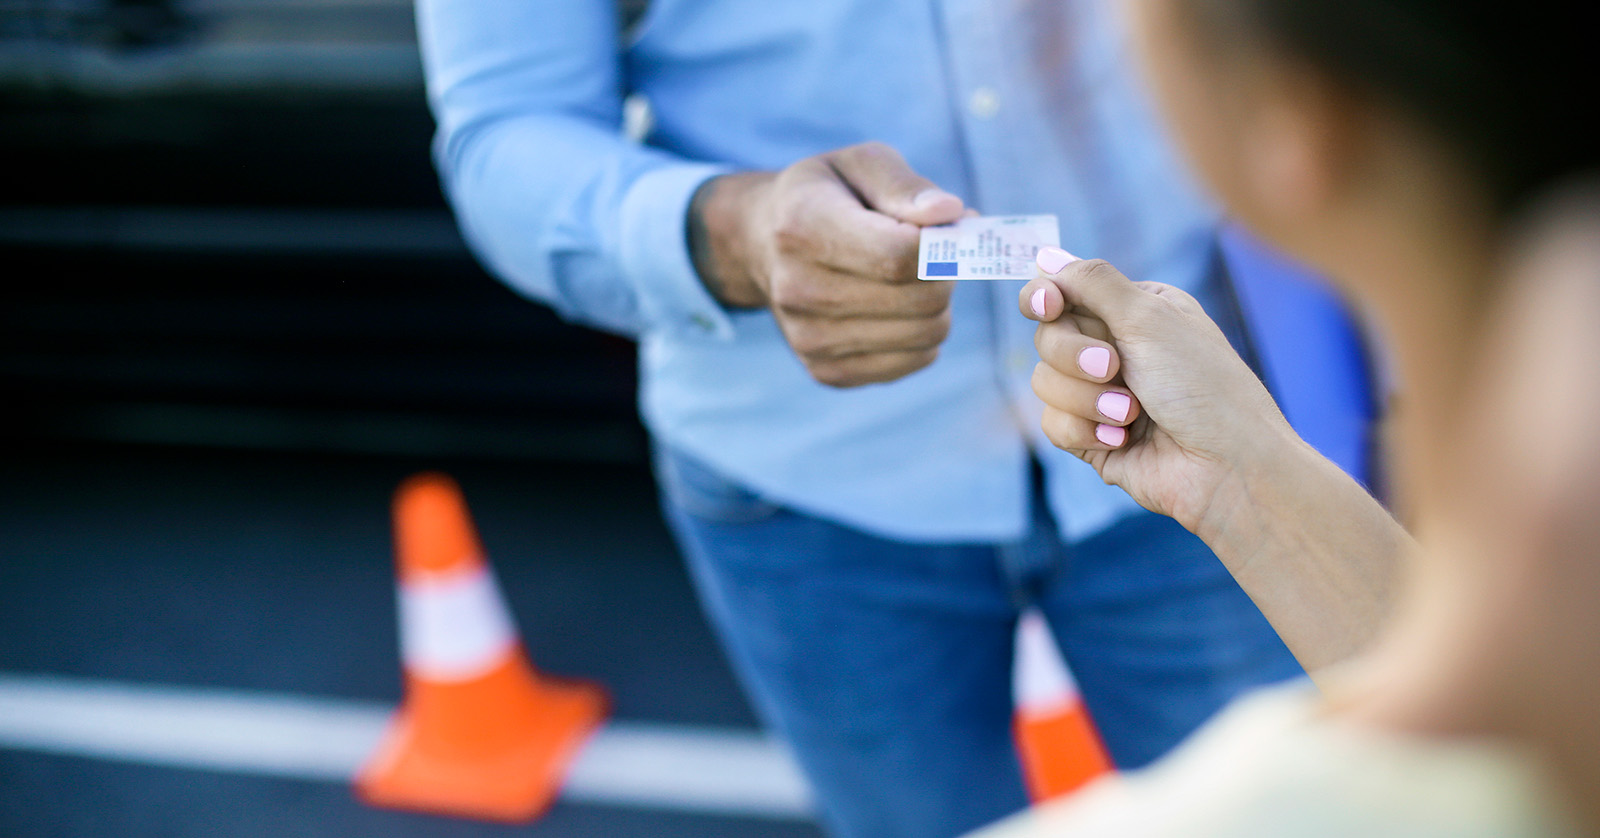 Close up view of older male handing a driver’s license to a younger female.